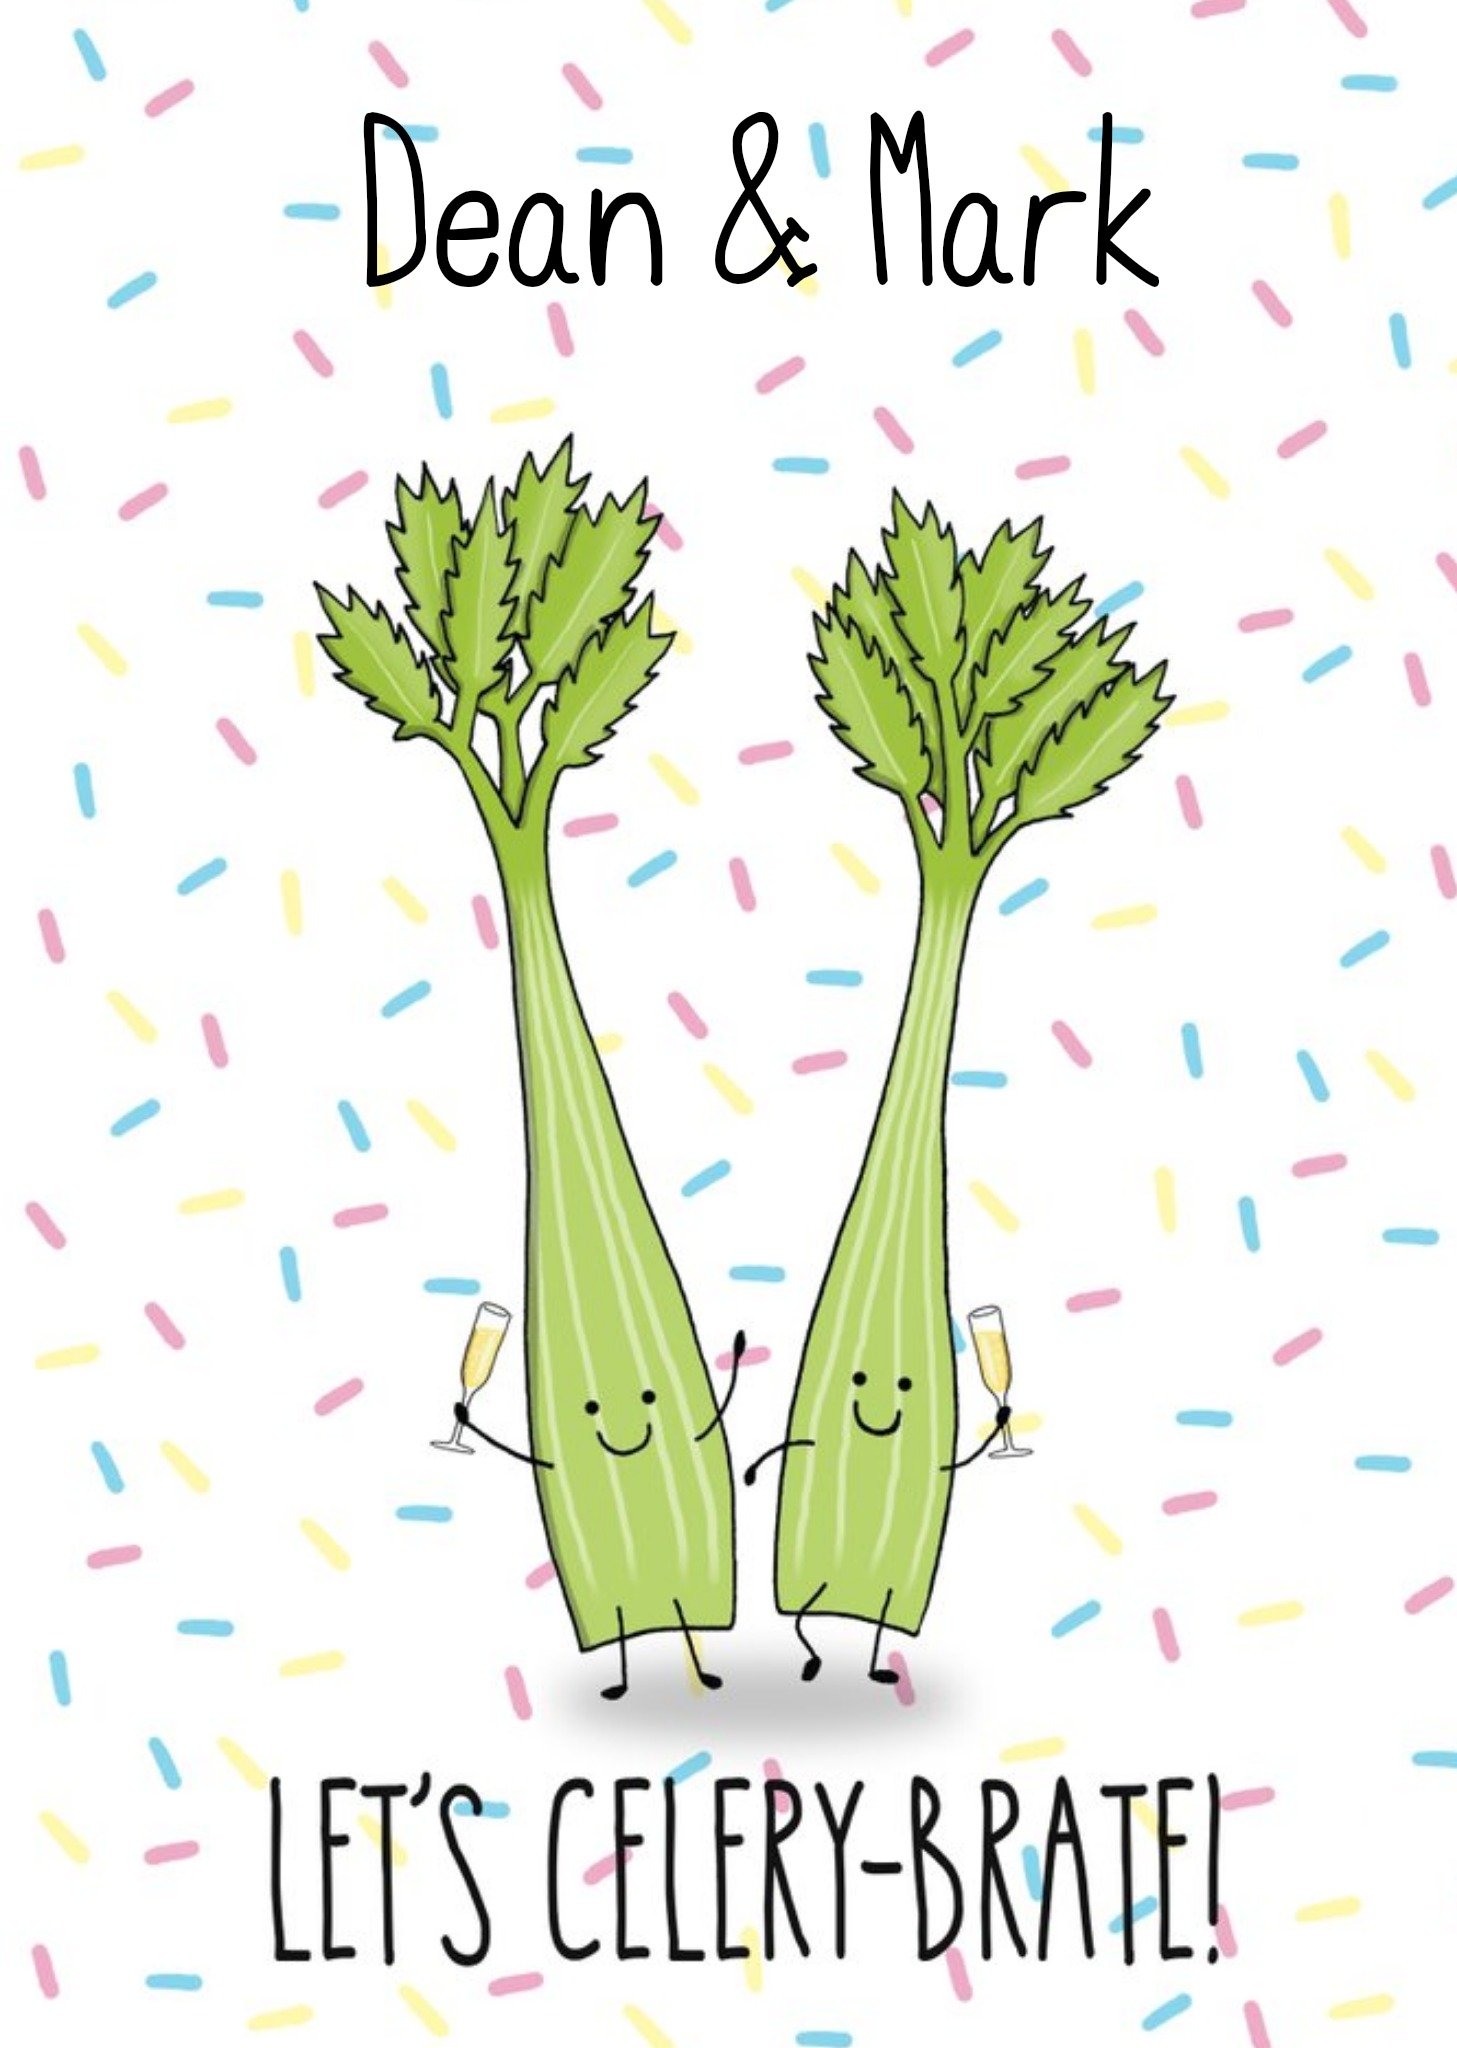 Moonpig Illustration Two Pieces Of Celery. Let's Celery-Brate Congratulations Card, Large